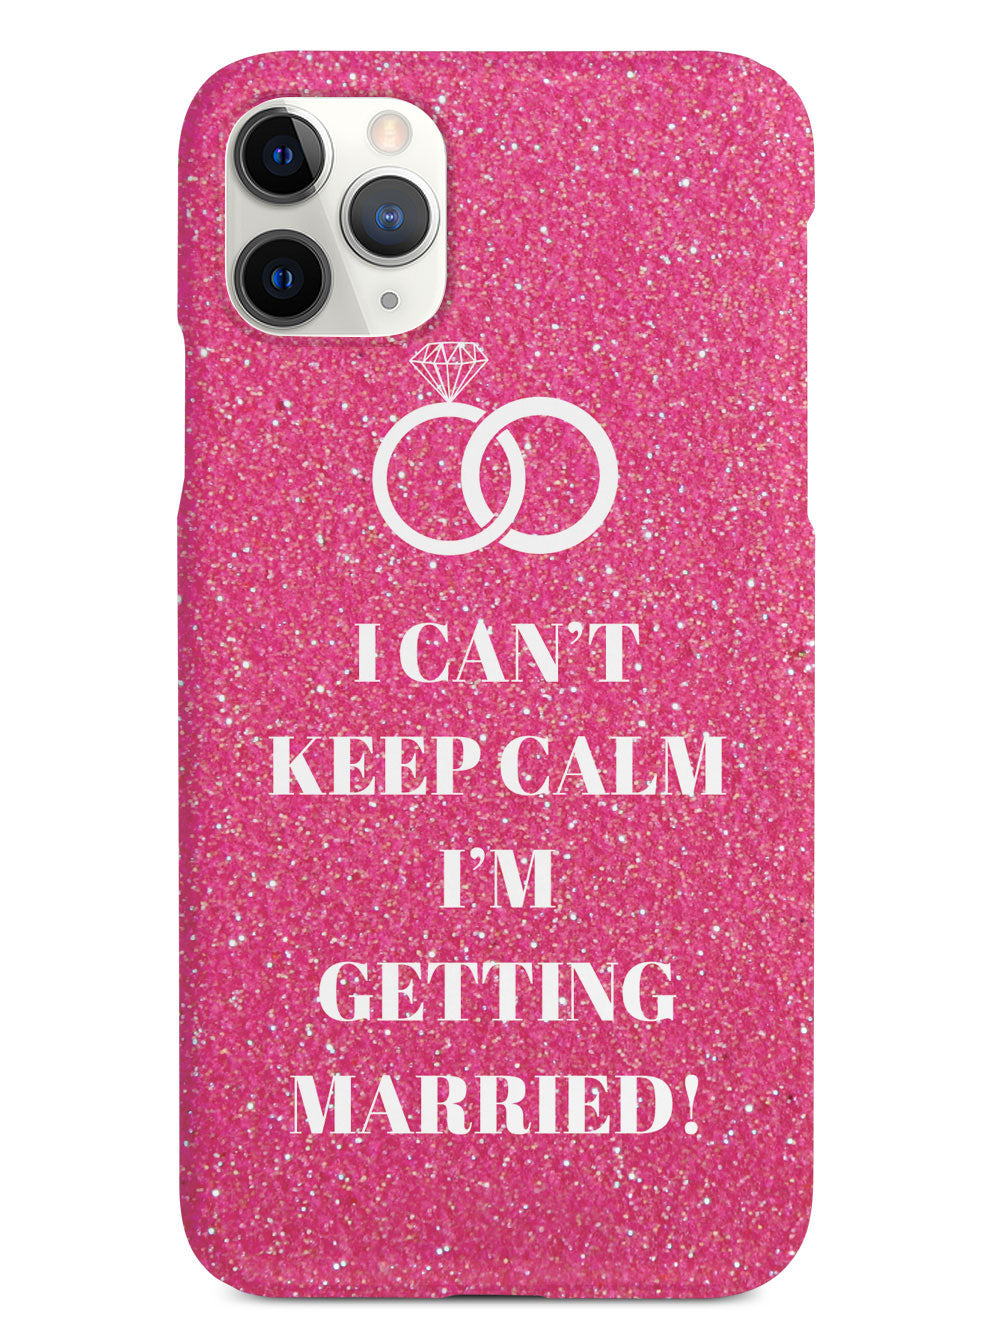 I Can't Keep Calm, I'm Getting Married! Case